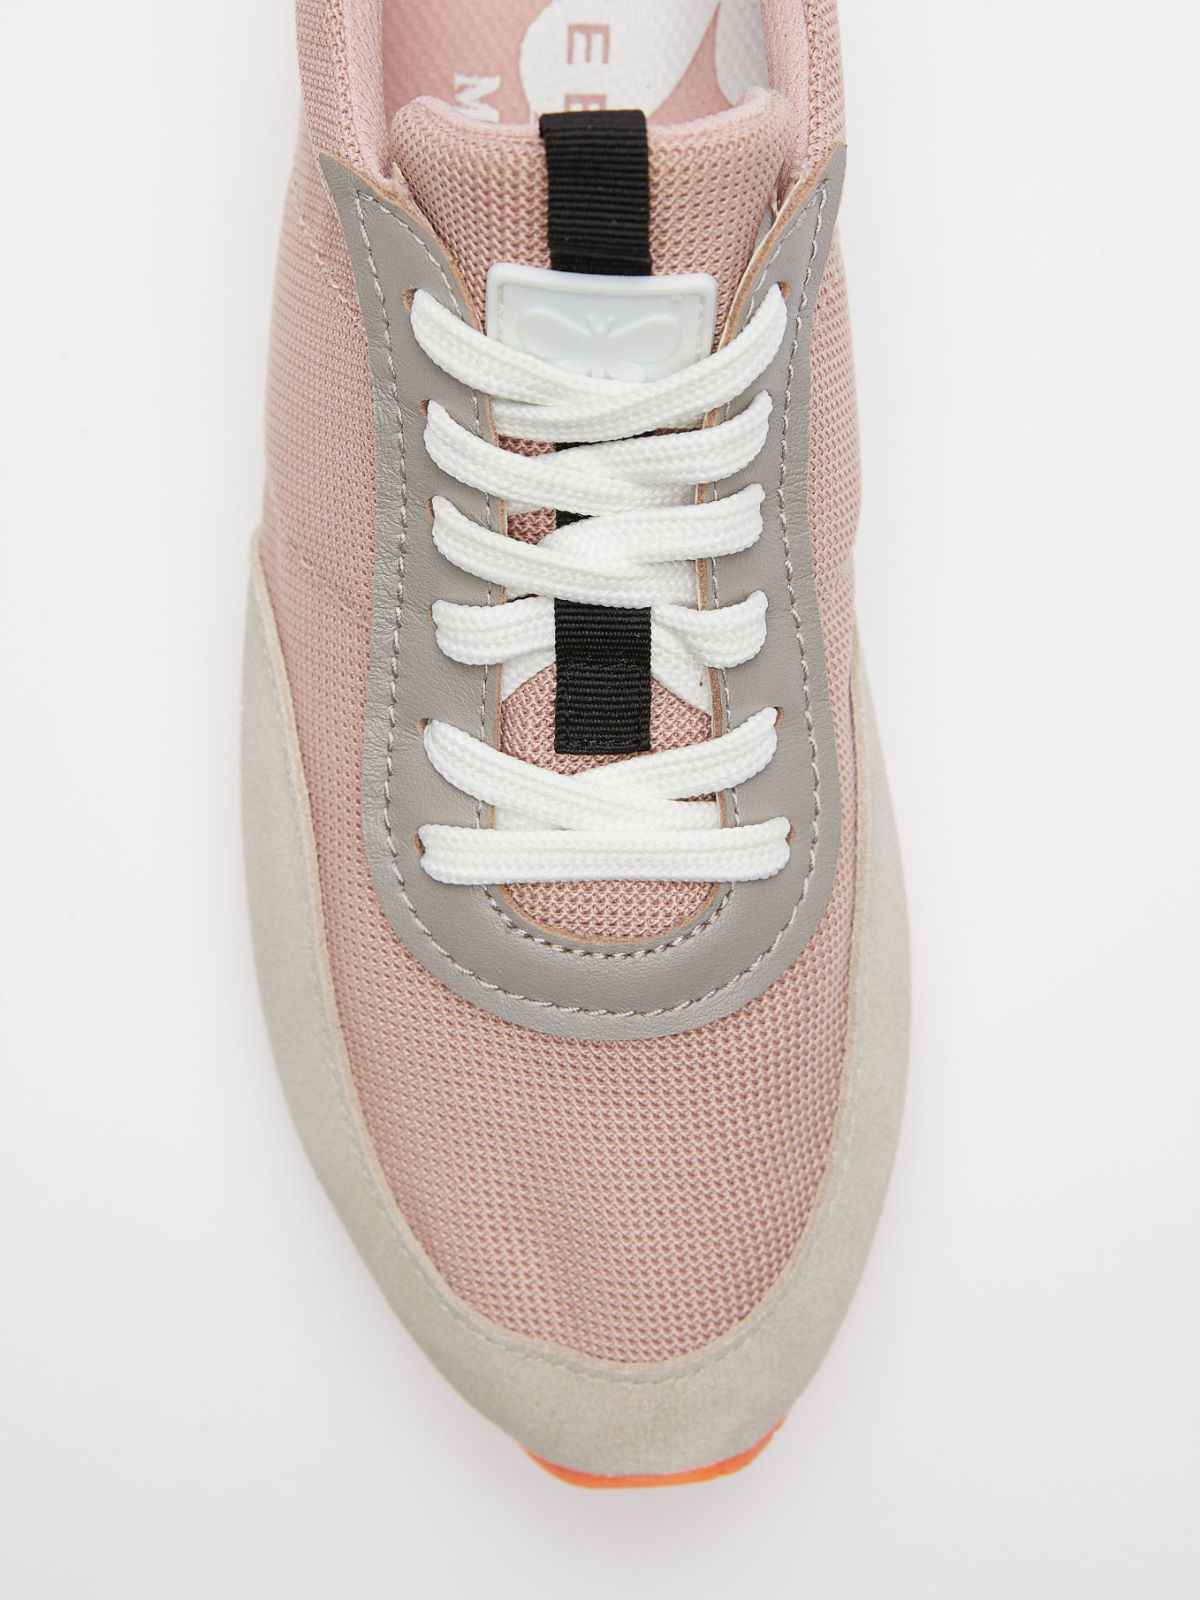 Leather sneakers - ANTIQUE ROSE - Weekend Max Mara - 5